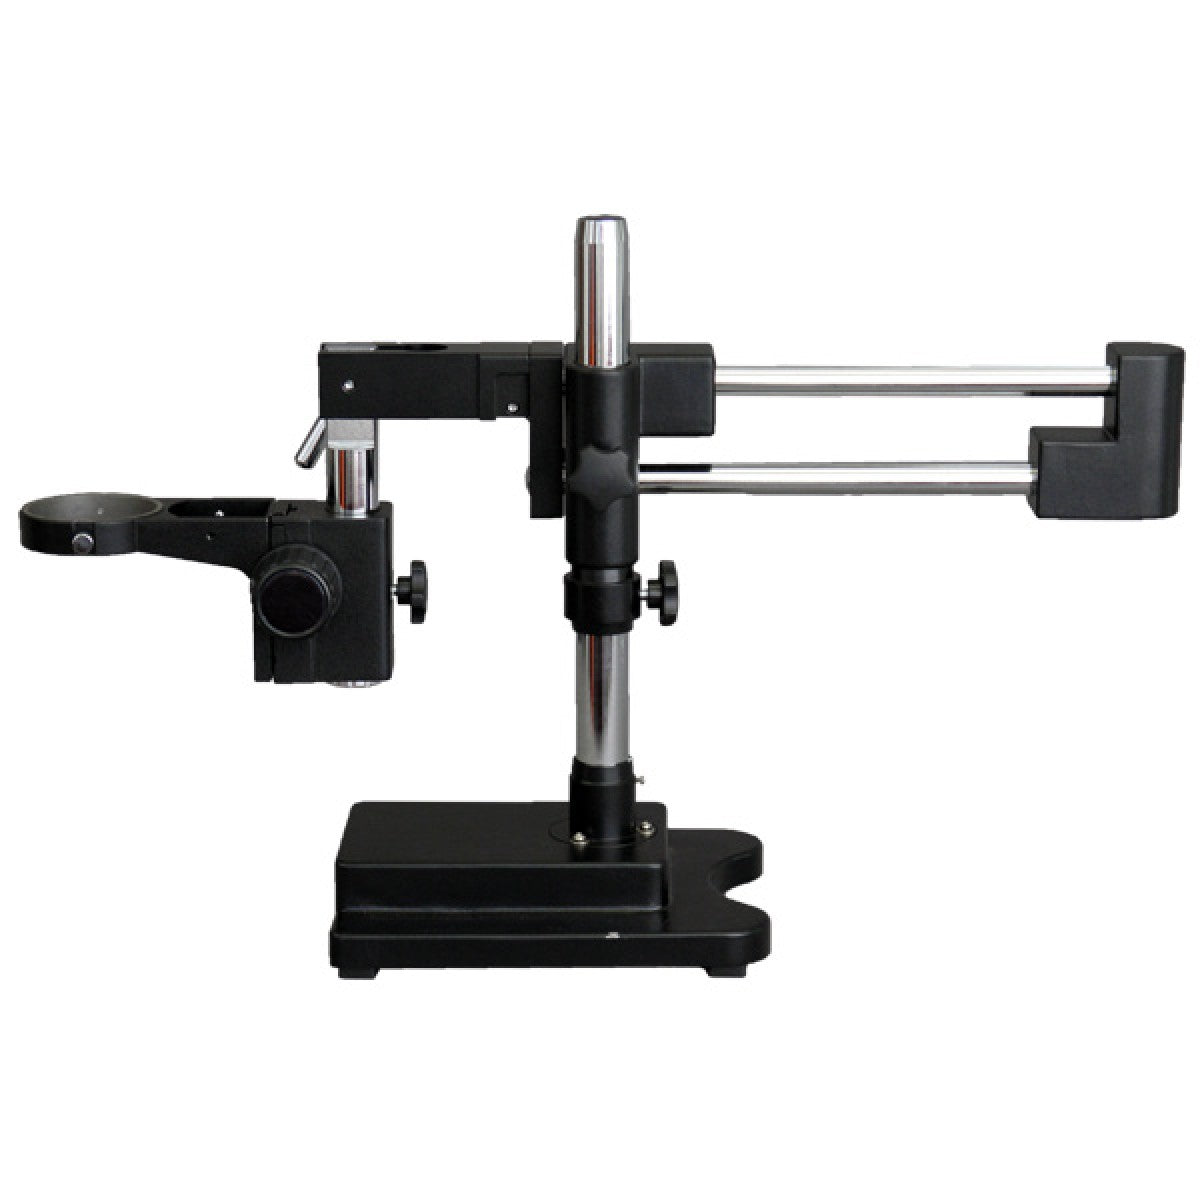 Double Arm Boom Stand for <a href='/stereo-microscope/'>Stereo Microscope</a> Tube Mount 76mm Focus Bloc  AmScope UK